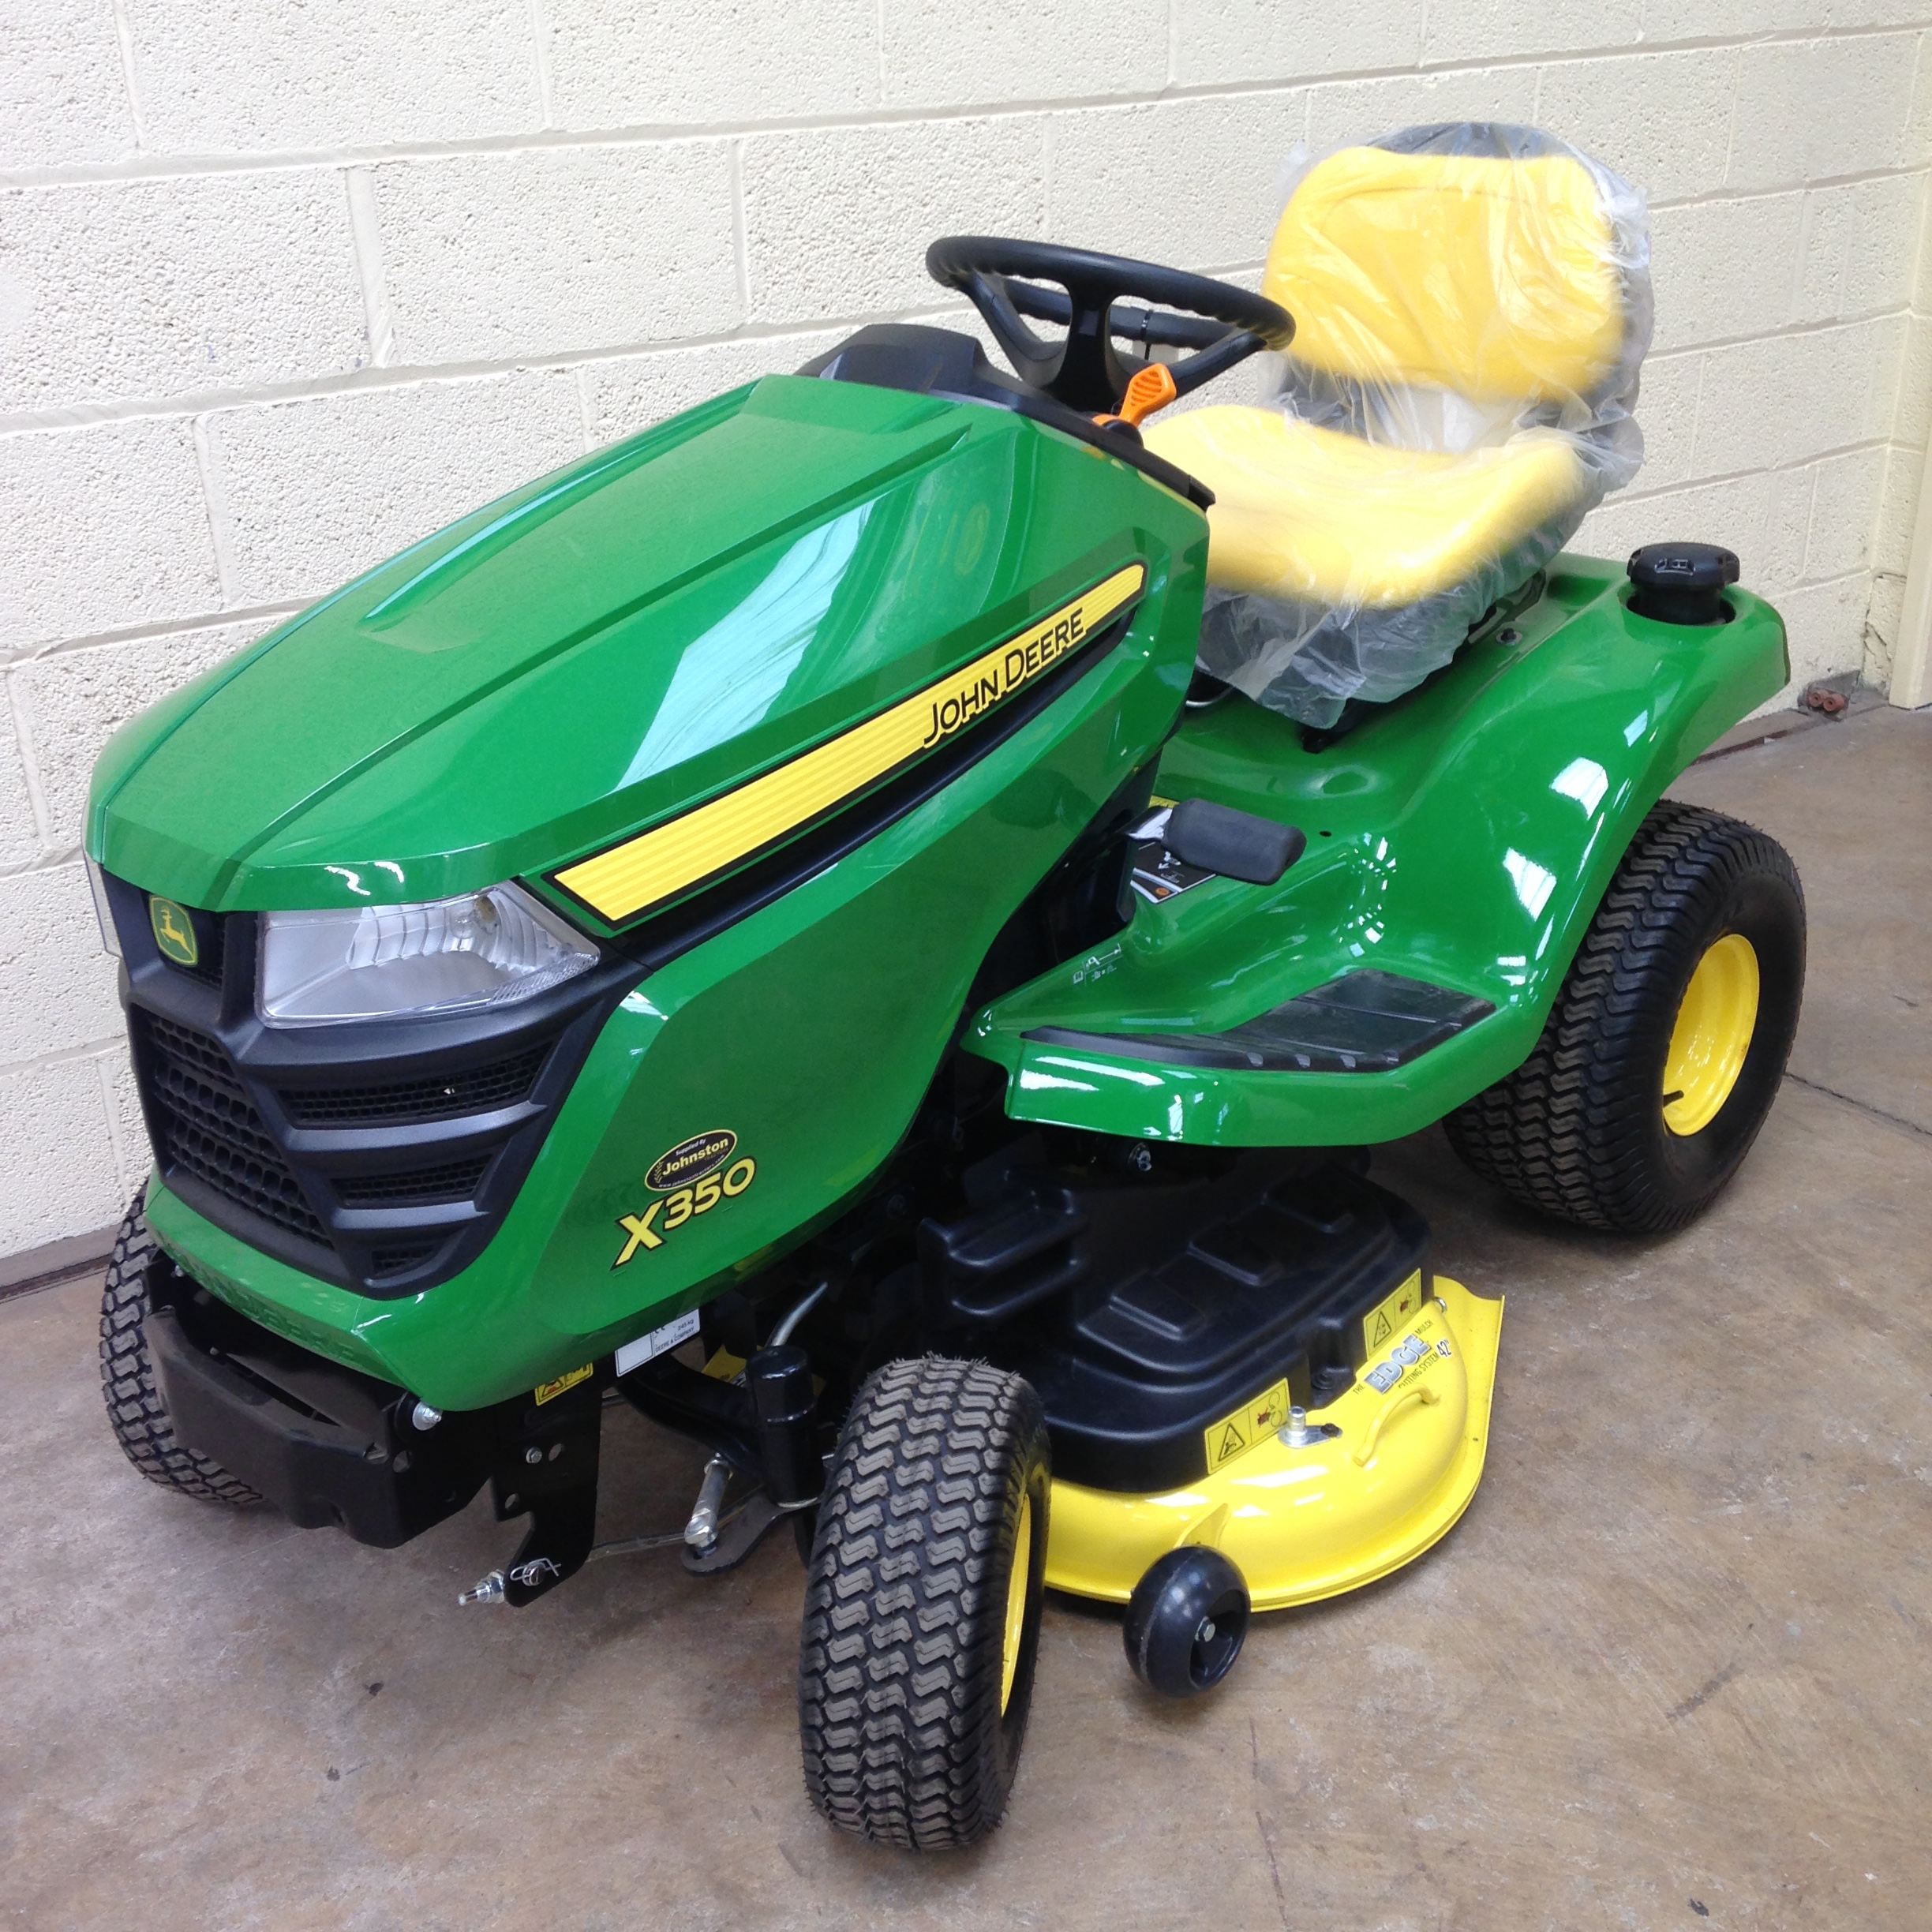 JOHN DEERE X350 LAWN TRACTOR (NEW) For Sale